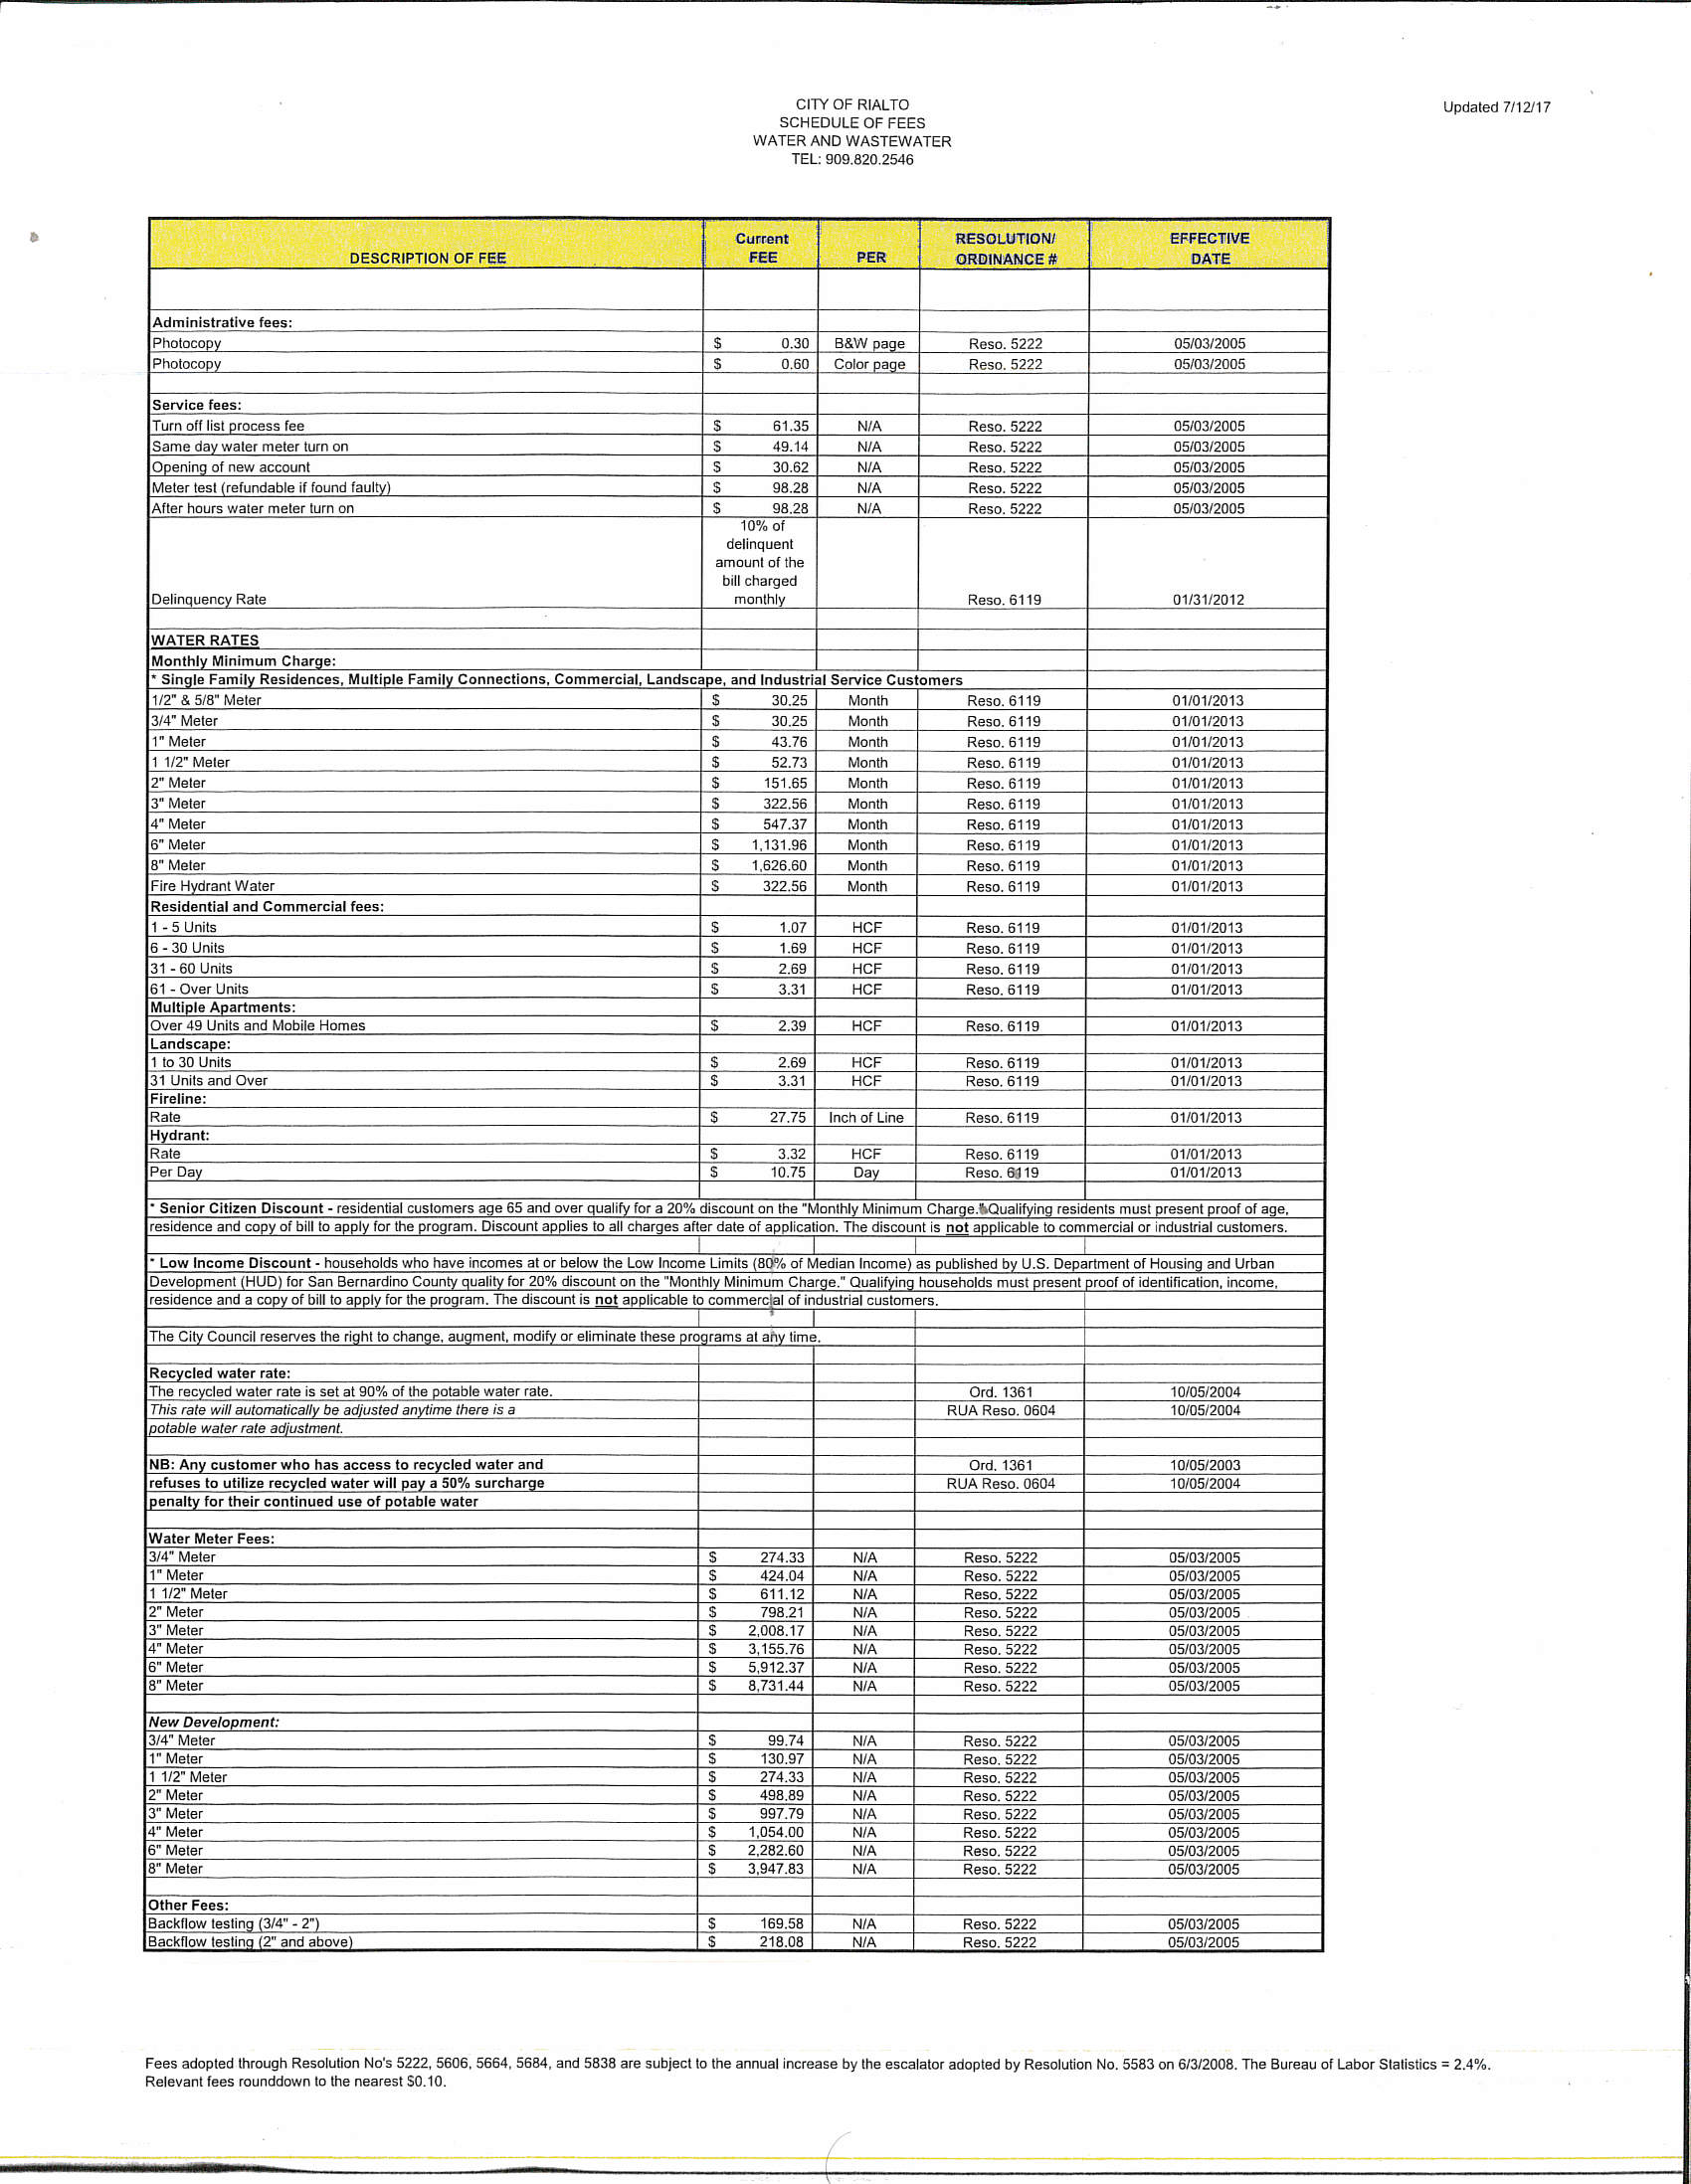 cs-schedule-of-fees-7-12-17-page-1-rialto-water-services